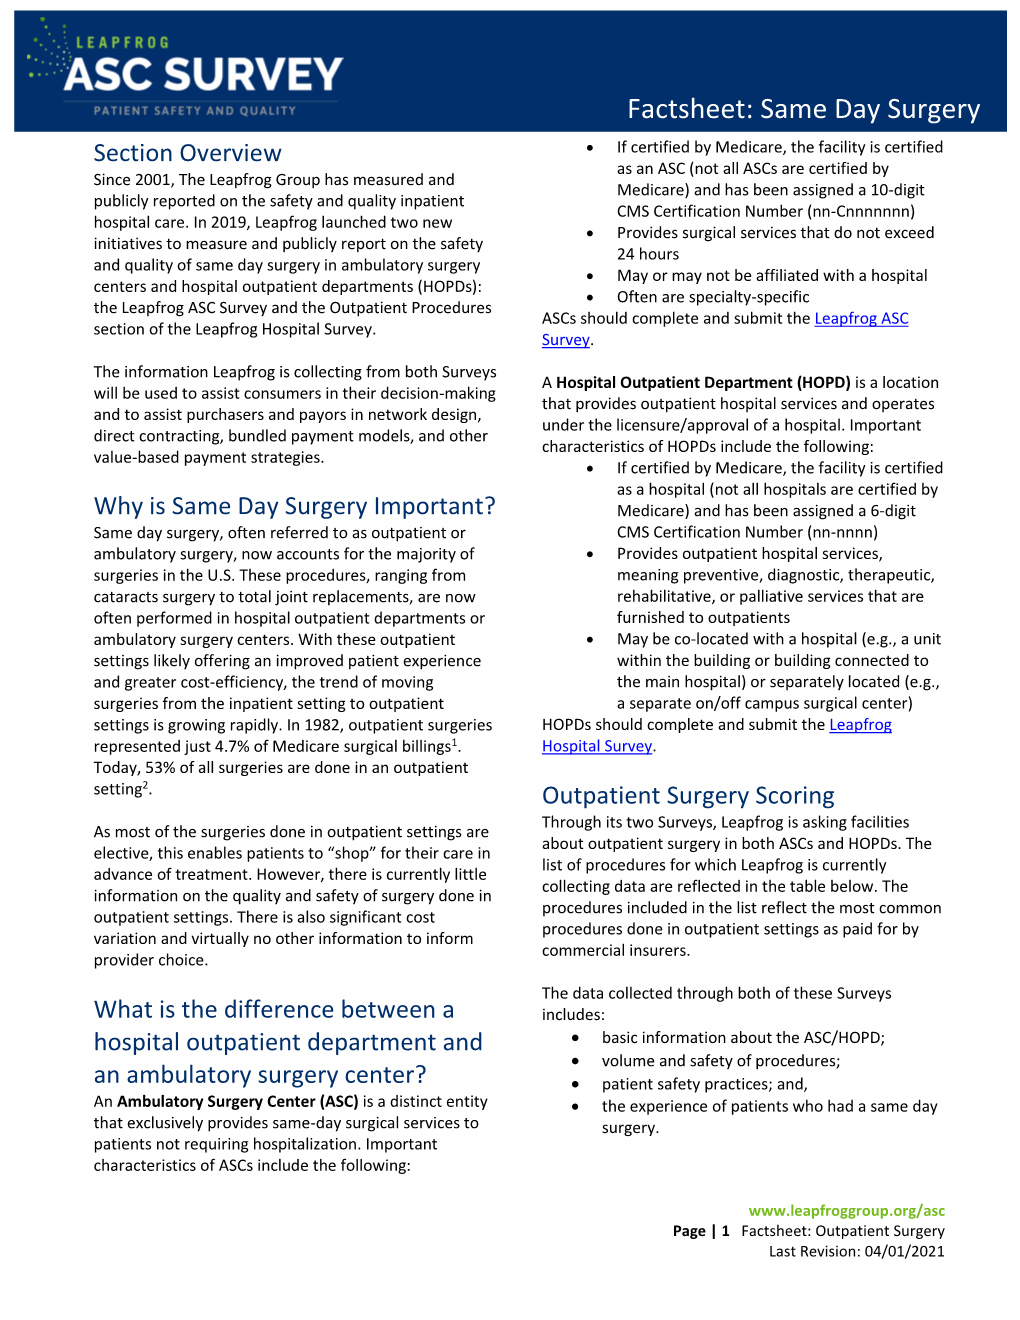 Fact Sheet on Elective Outpatient Surgery